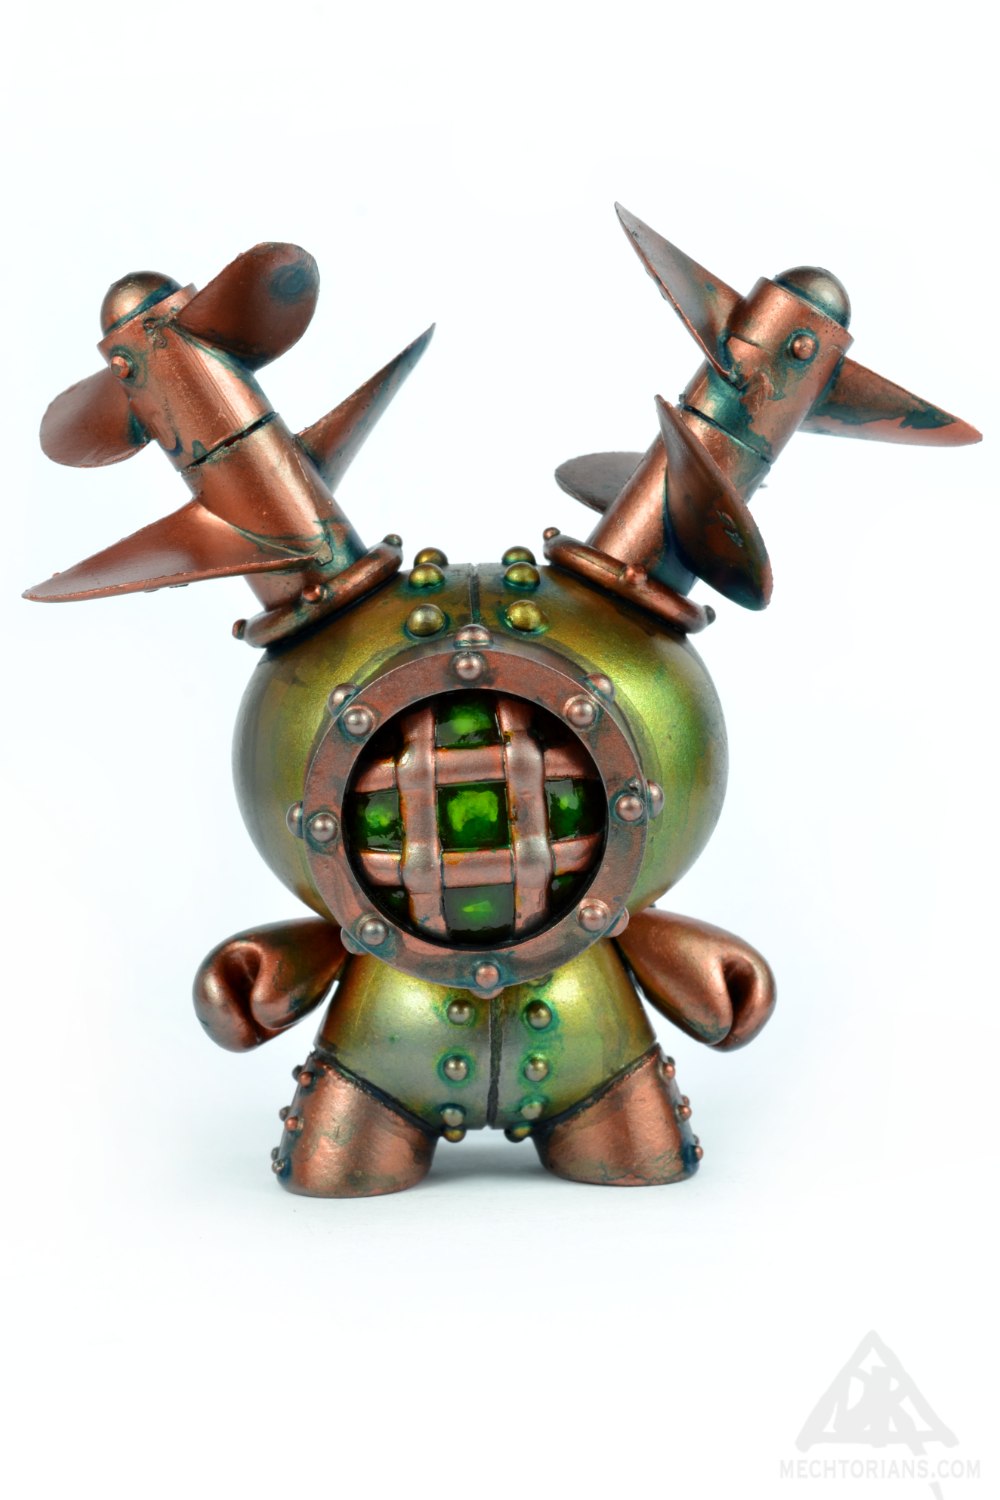 The Submariner. A submarine based Mechtorian Customised 3" Dunny by Doktor A. Bruce Whistlecraft.